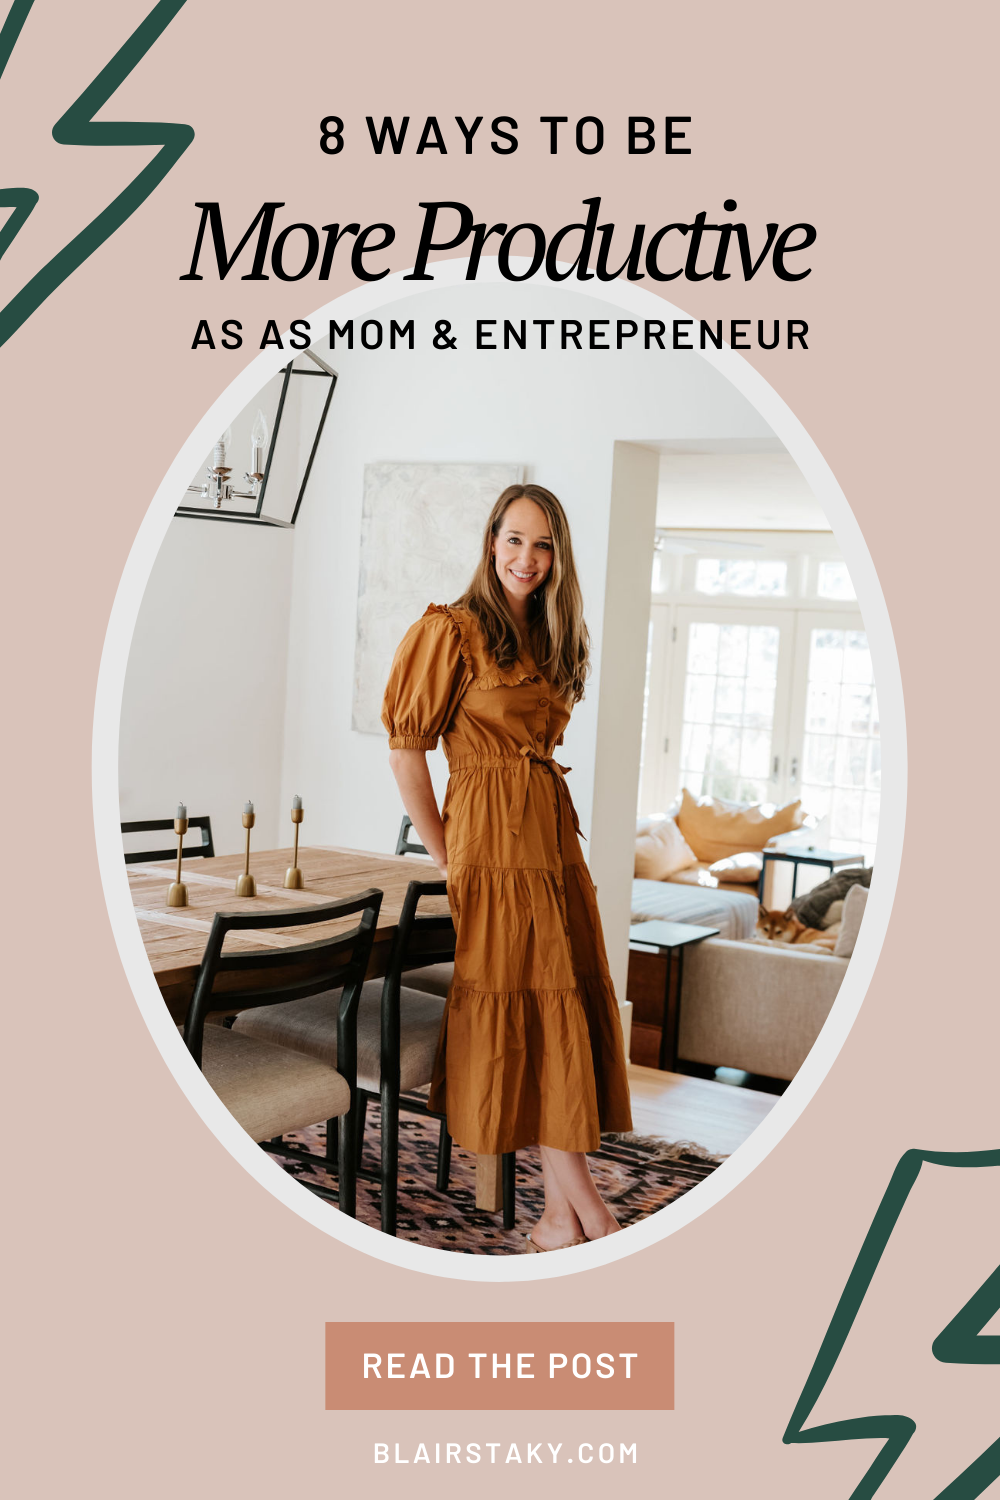 How to Be More Productive at Work as a Mom & Entrepreneur